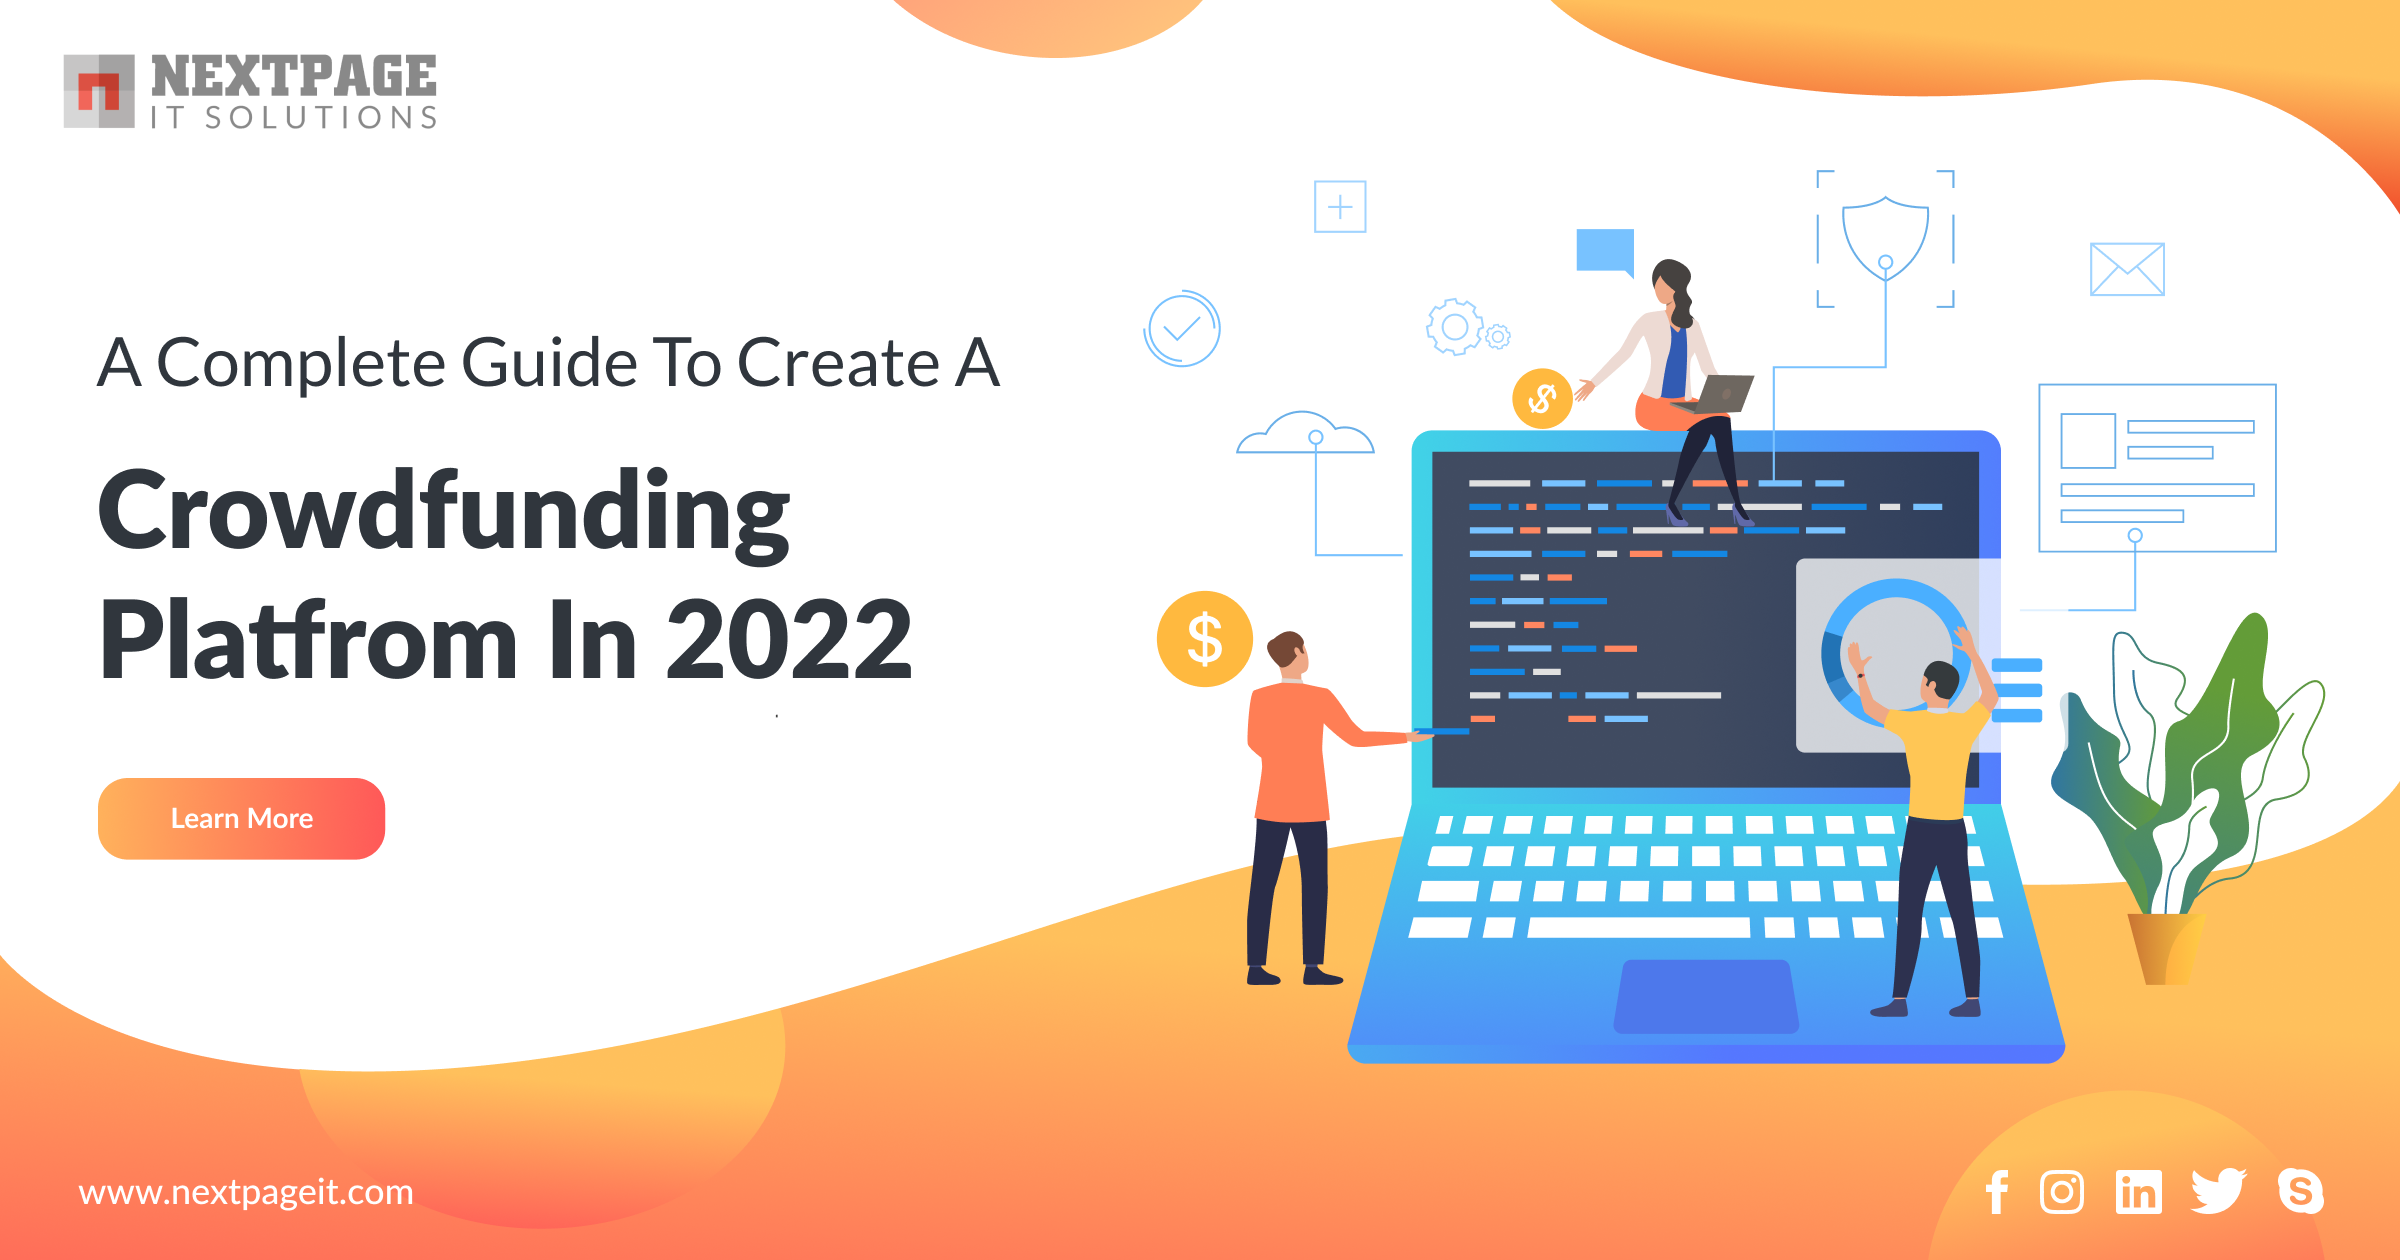 A Complete Guide To Create A Crowdfunding Platform In 2022